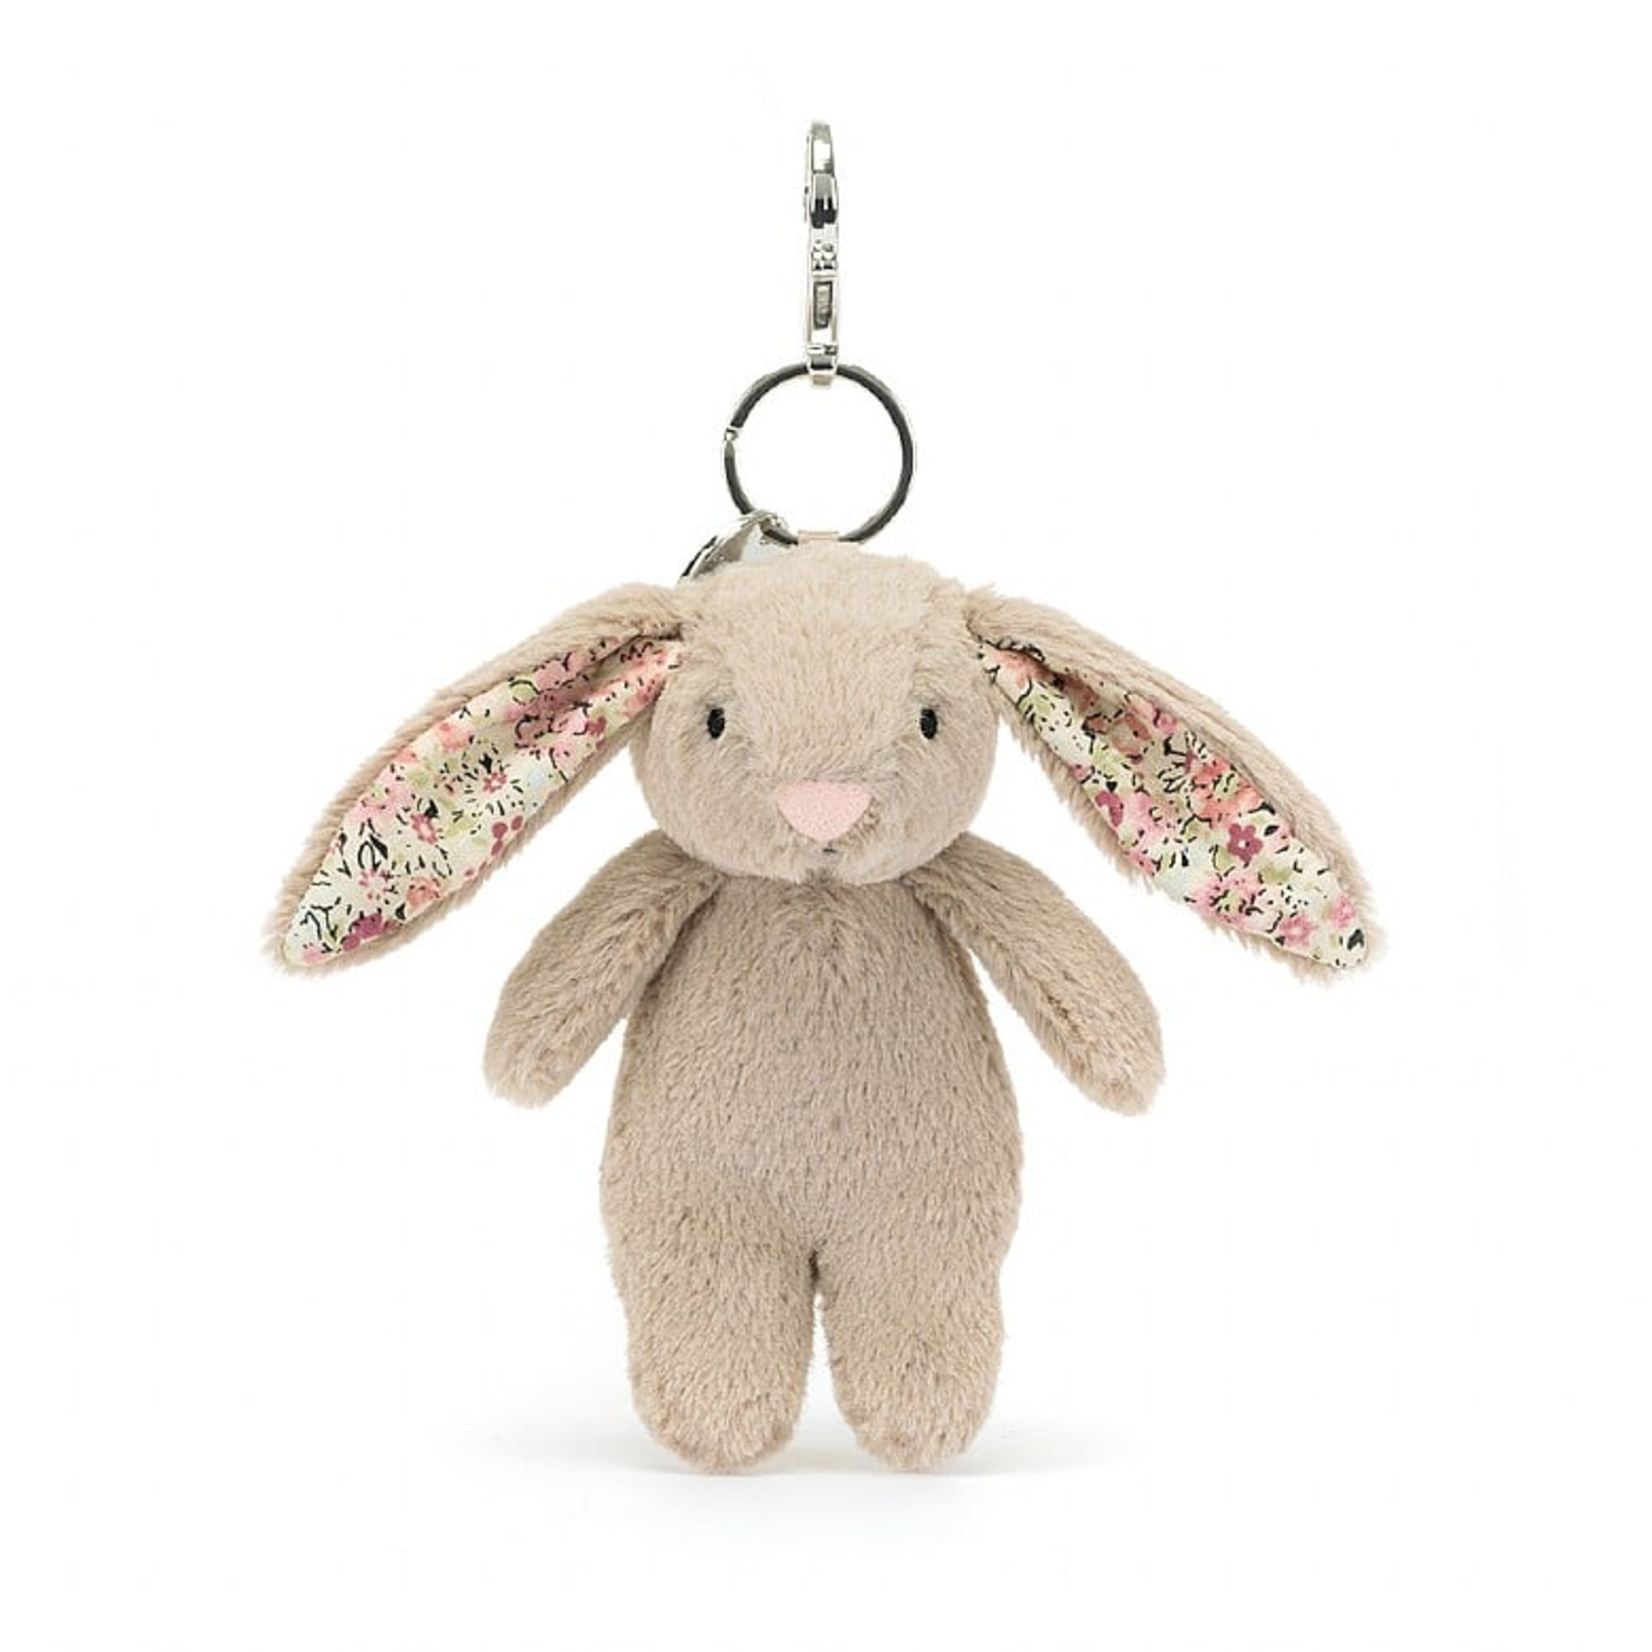 Jellycat - Bag Charms Jellycat - Blossom Beige Bunny Bag Charm